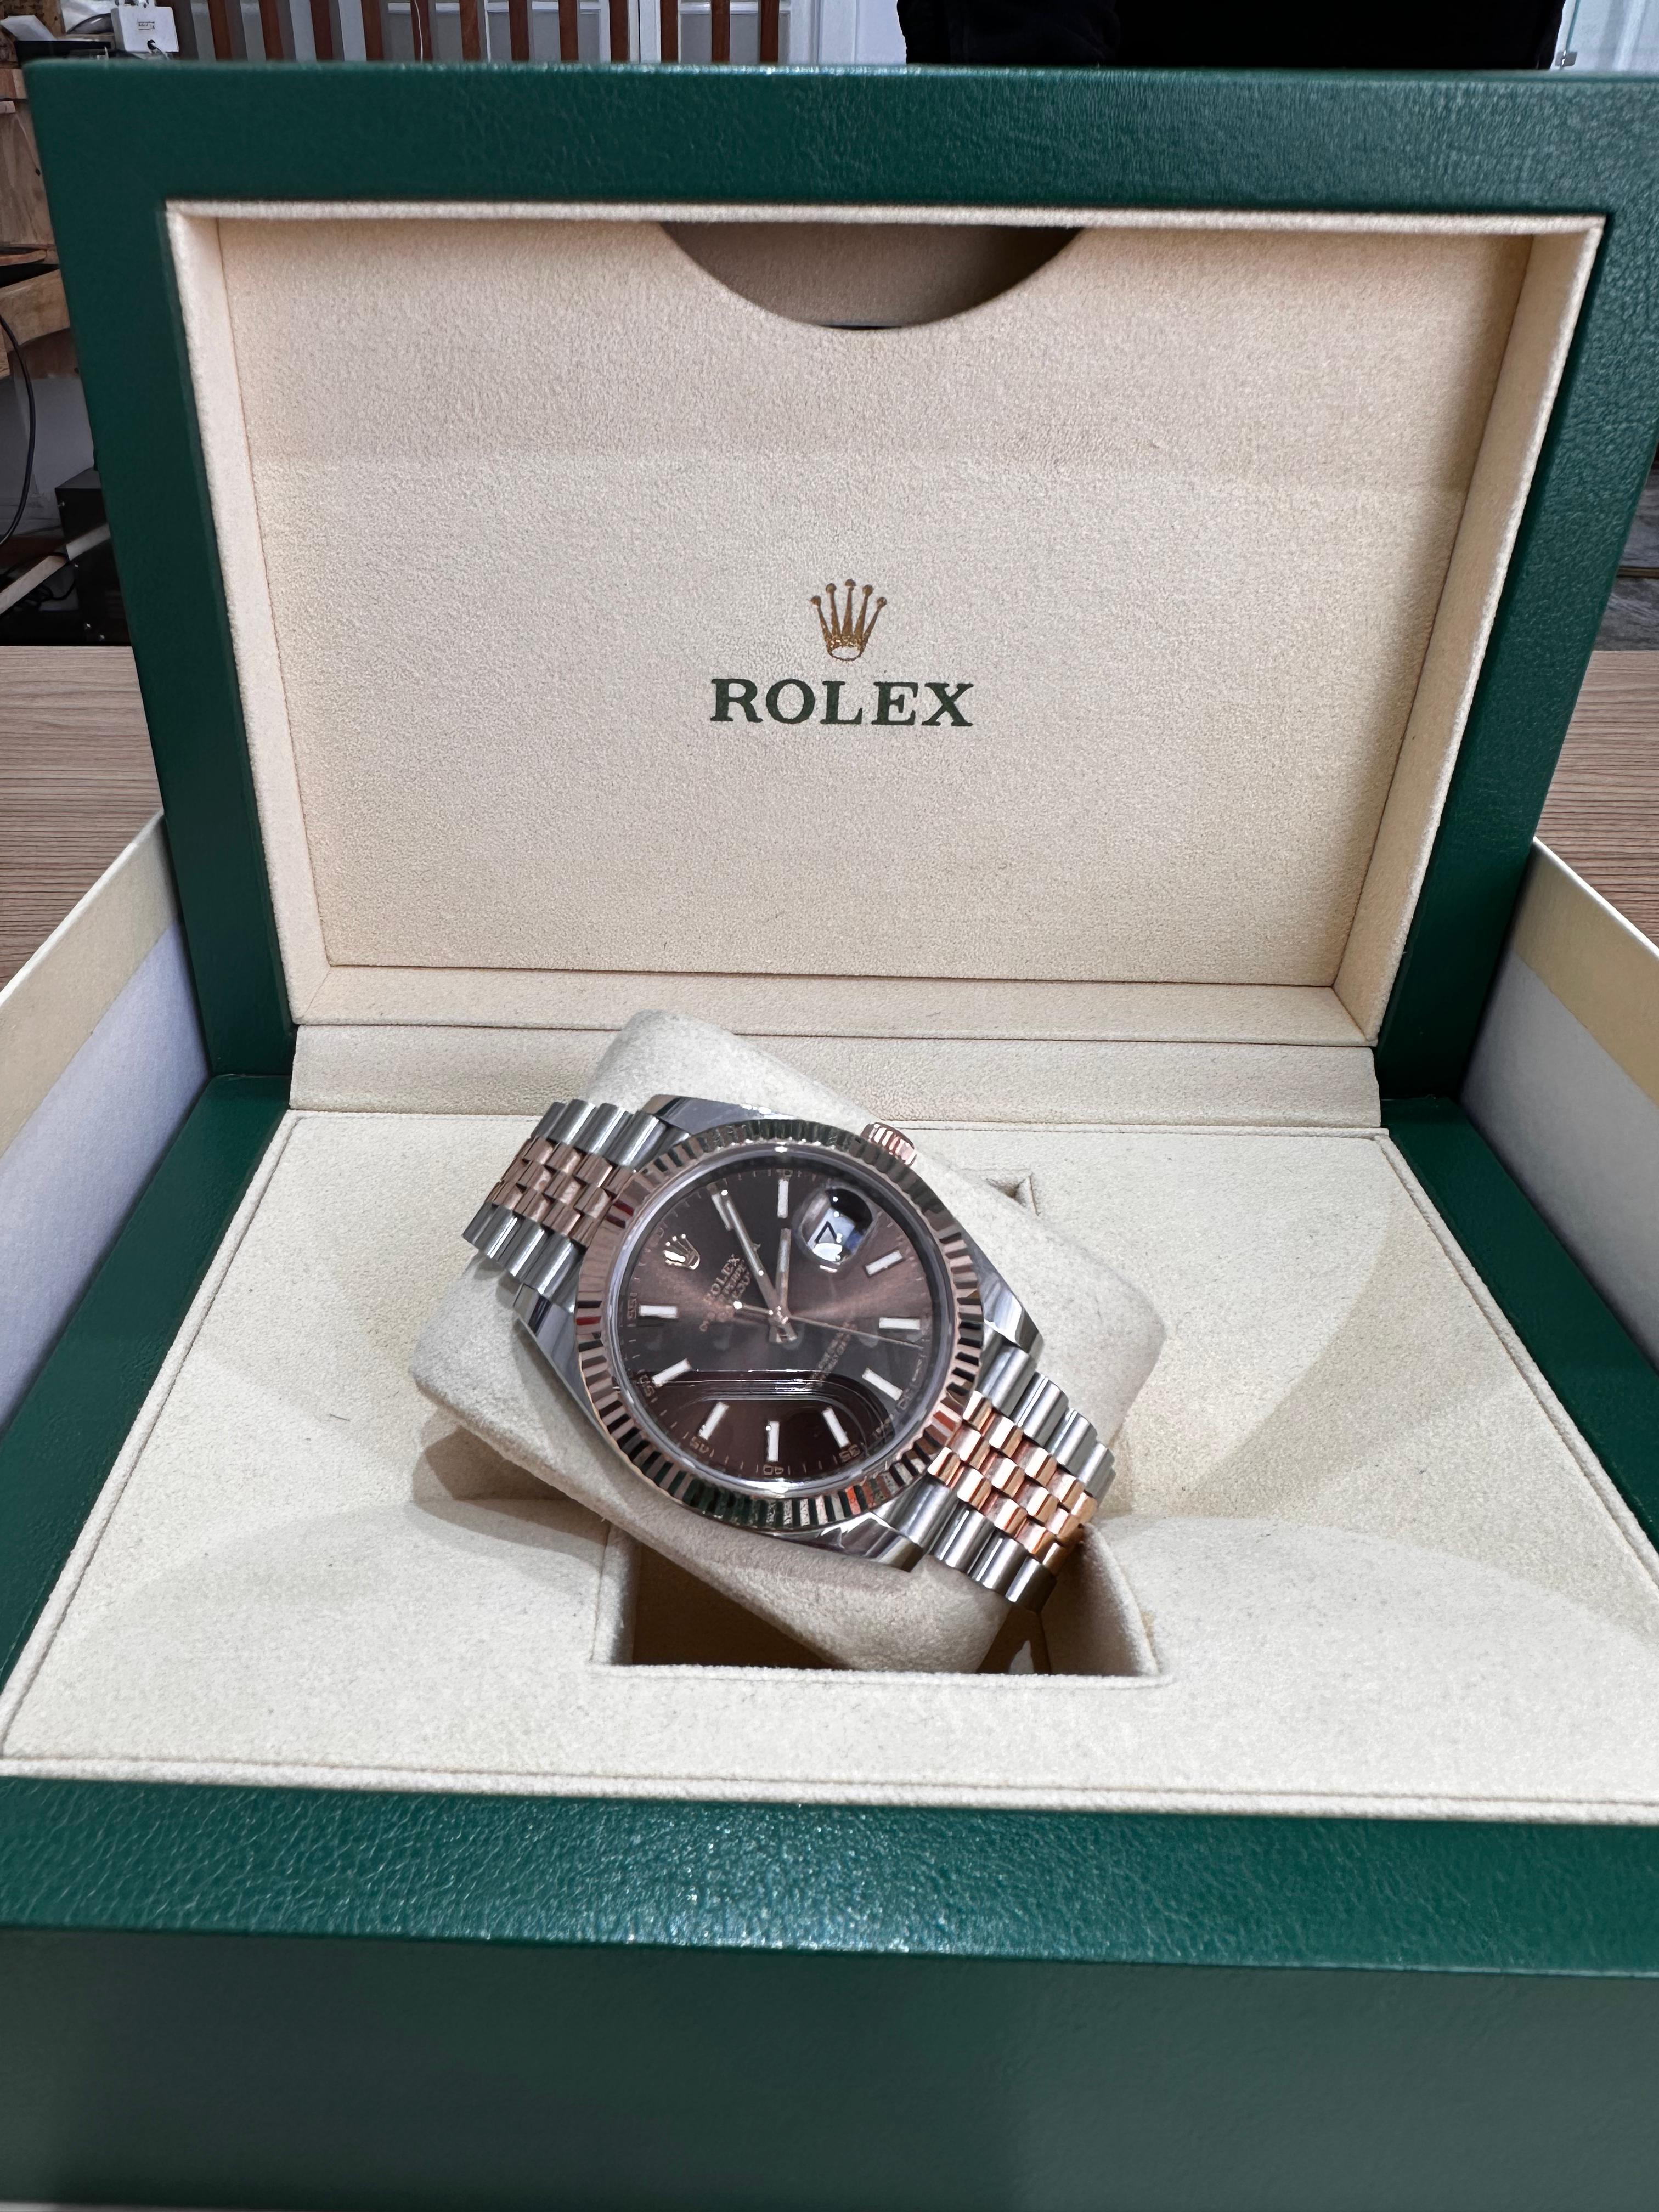 2019 Rolex Datejust 41 Two Tone Rose Gold Fluted Bezel Jubilee Bracelet With Chocolate Index Marker Dial